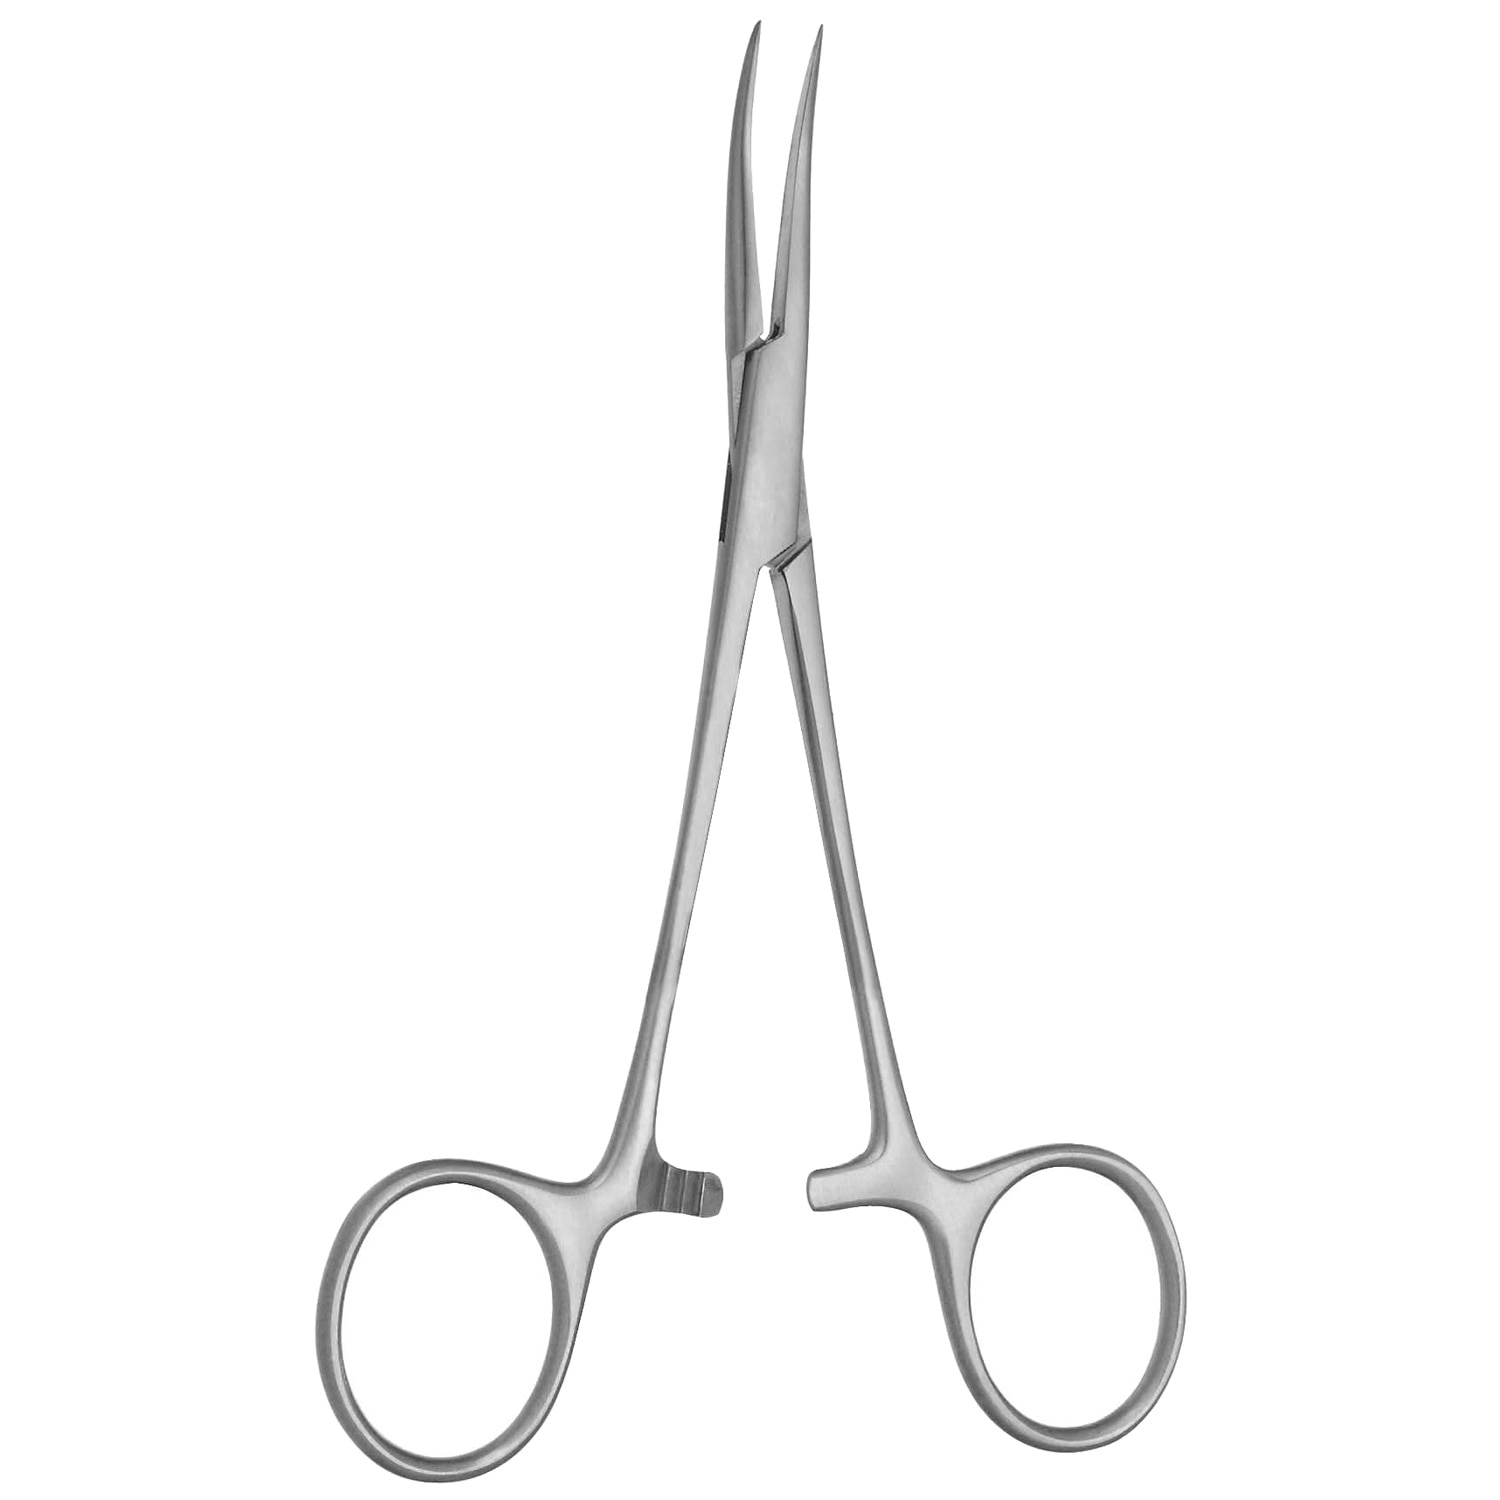 This Codman Pick and Knife V. Mueller Forceps and Miscellaneous Tool S –  KenMed Surgical